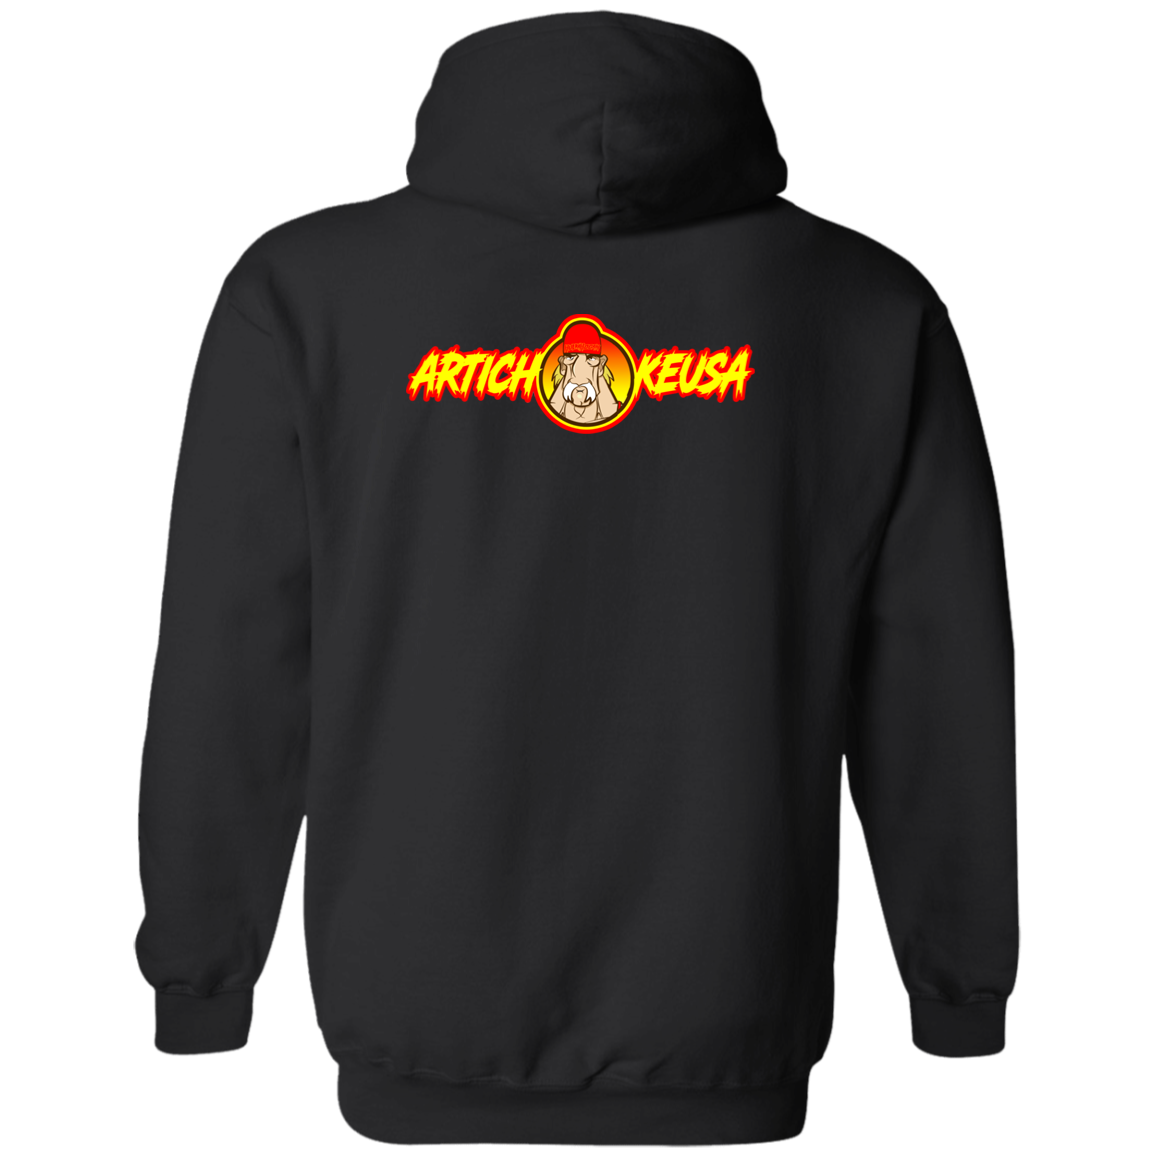 ArtichokeUSA Character and Font Design. Let’s Create Your Own Design Today. Fan Art. The Hulkster.  Zip Up Hooded Sweatshirt